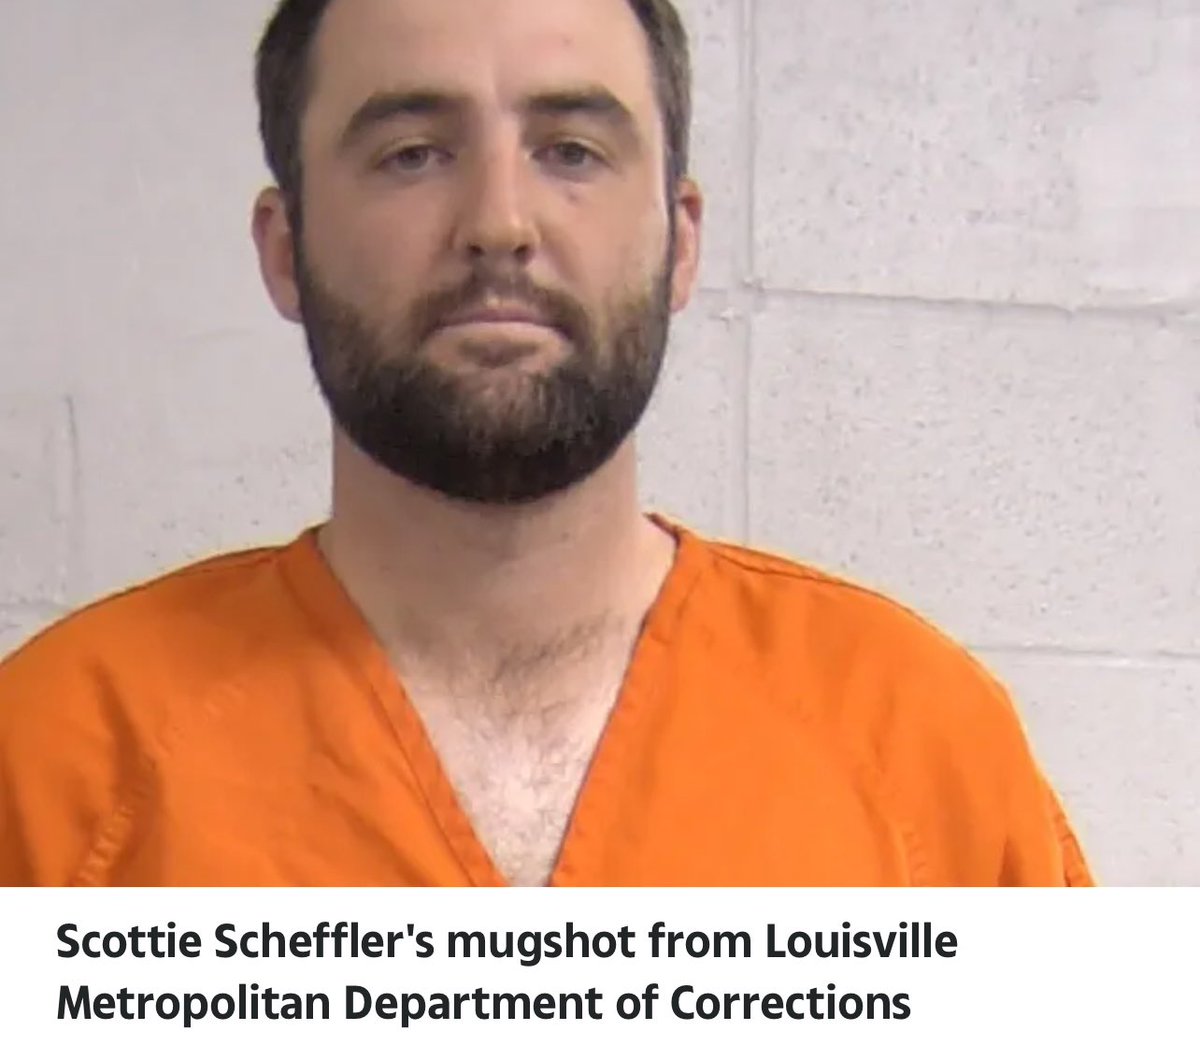 All charges dropped against Scottie Scheffler. What’s going to happen to the policeman that lied?